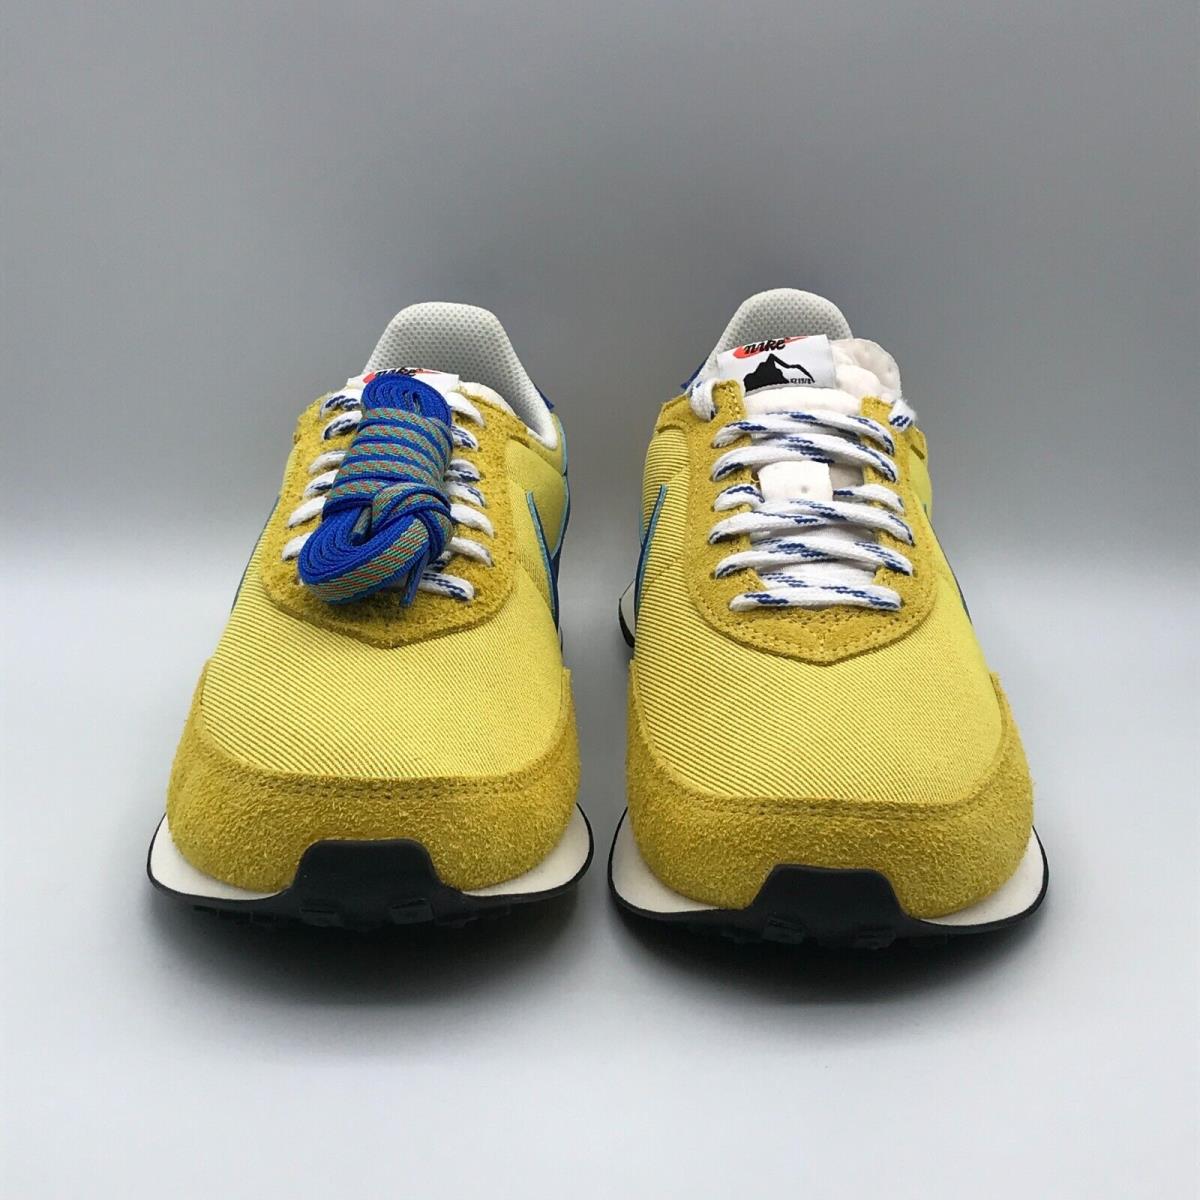 Nike Shoes Mens 9 Yellow Royal Blue White Waffle Trainer 2 SD Sneakers